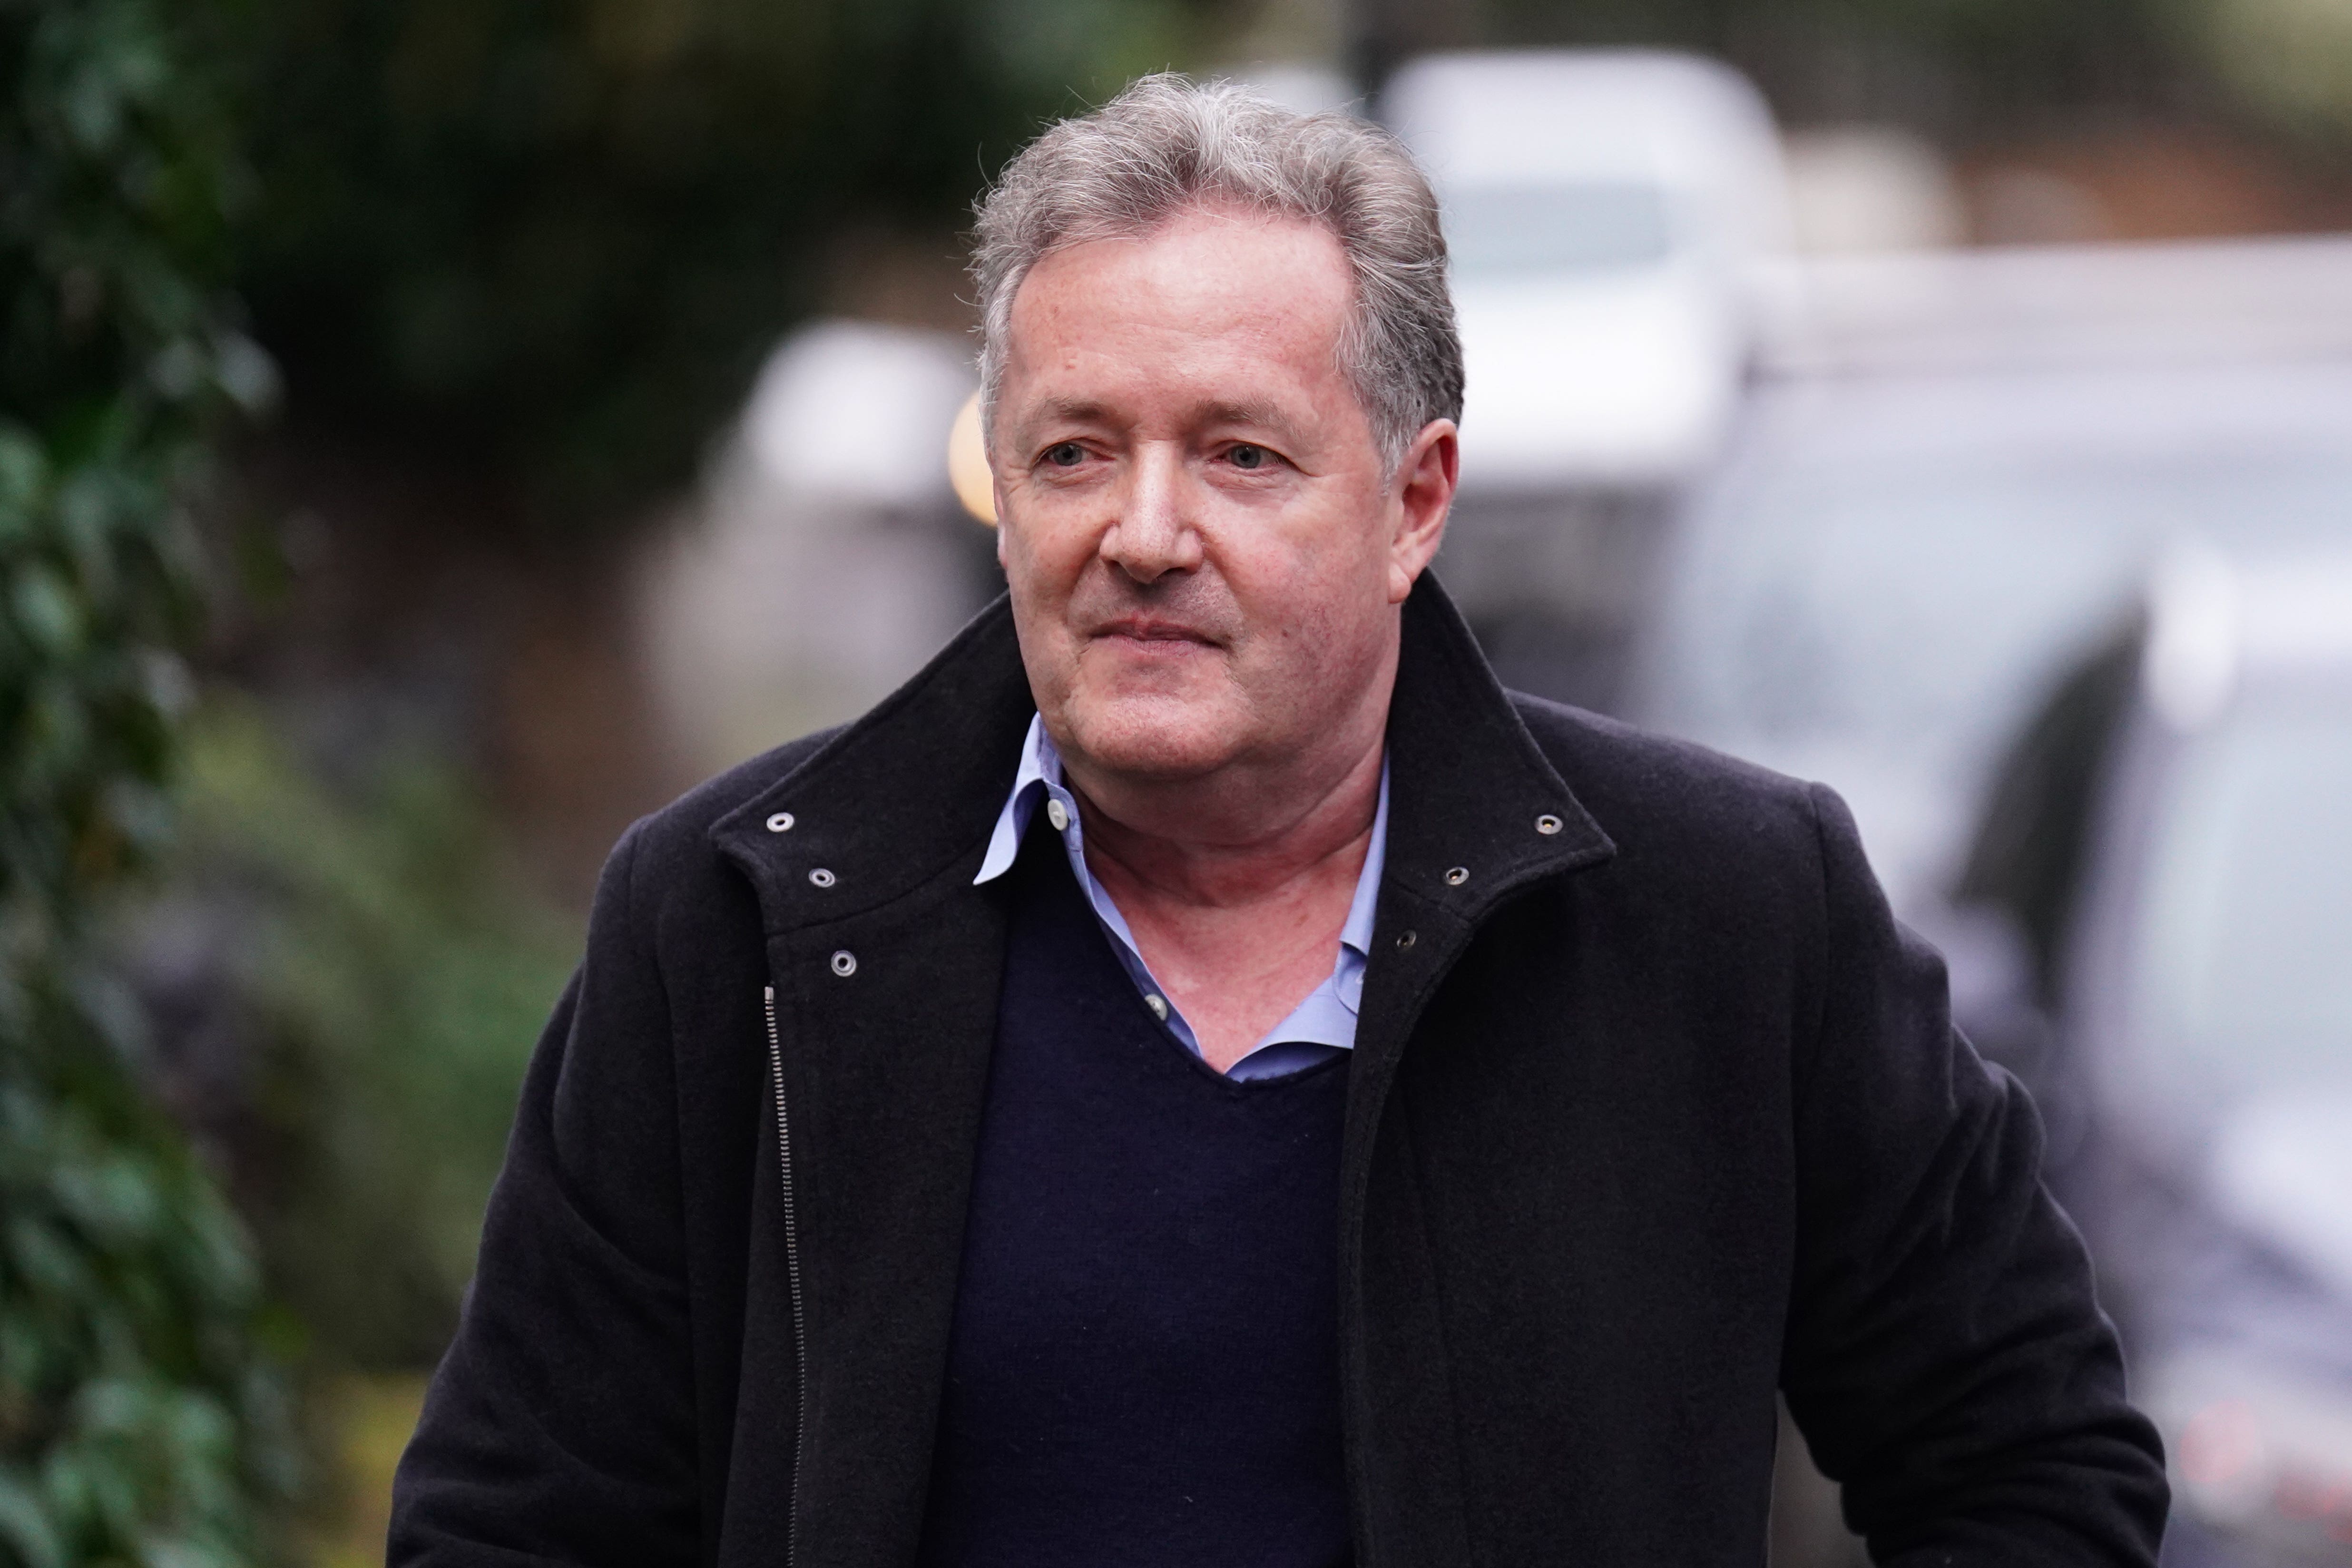 Piers Morgan has been slammed for his comments on the Princess of Wales’s return (James Manning/PA)